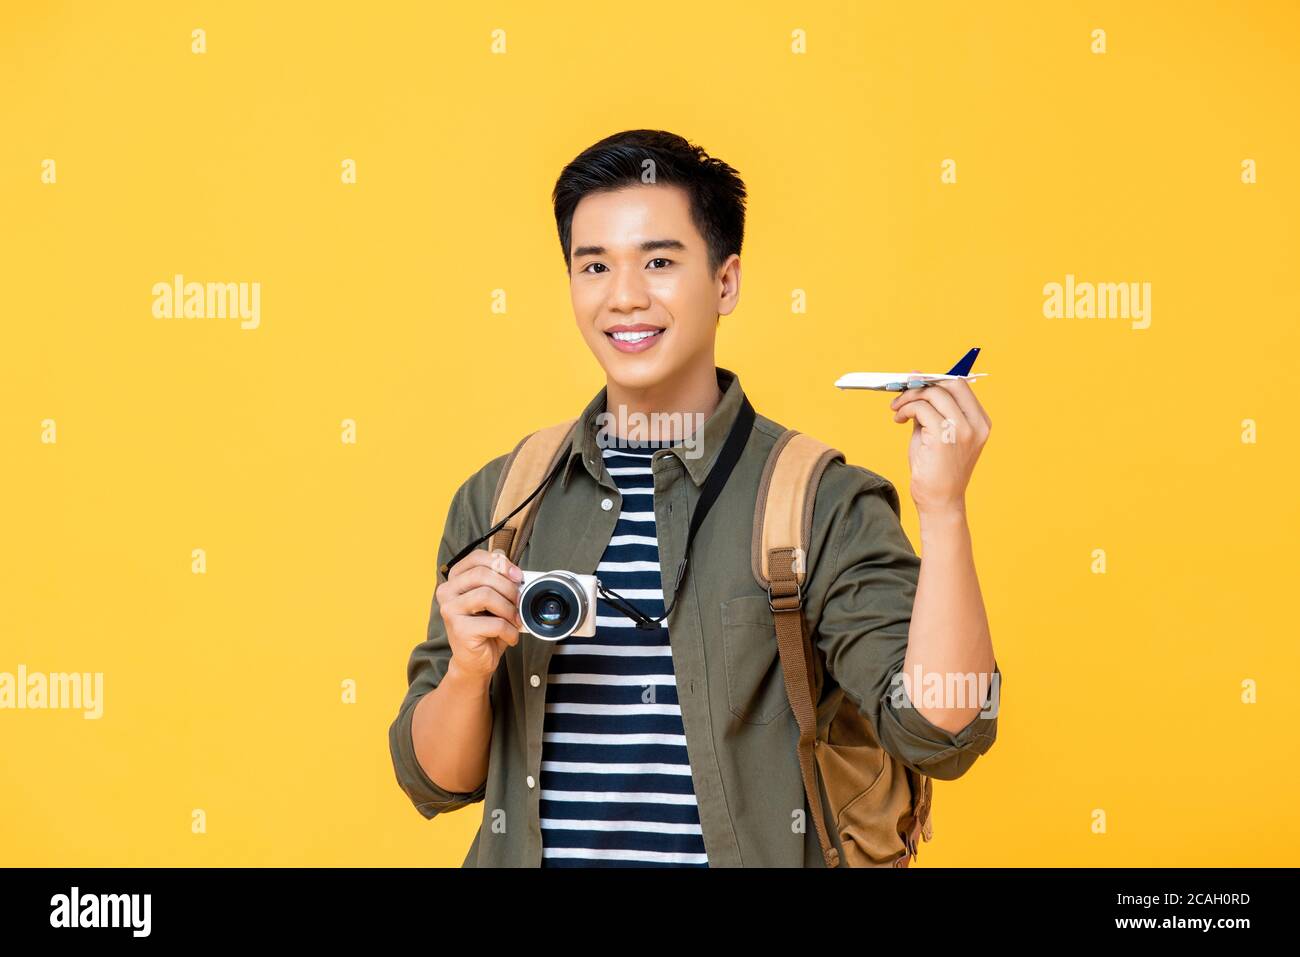 Handsome smiling Asian tourist man holding plane model and camera isolated on yellow studio background Stock Photo